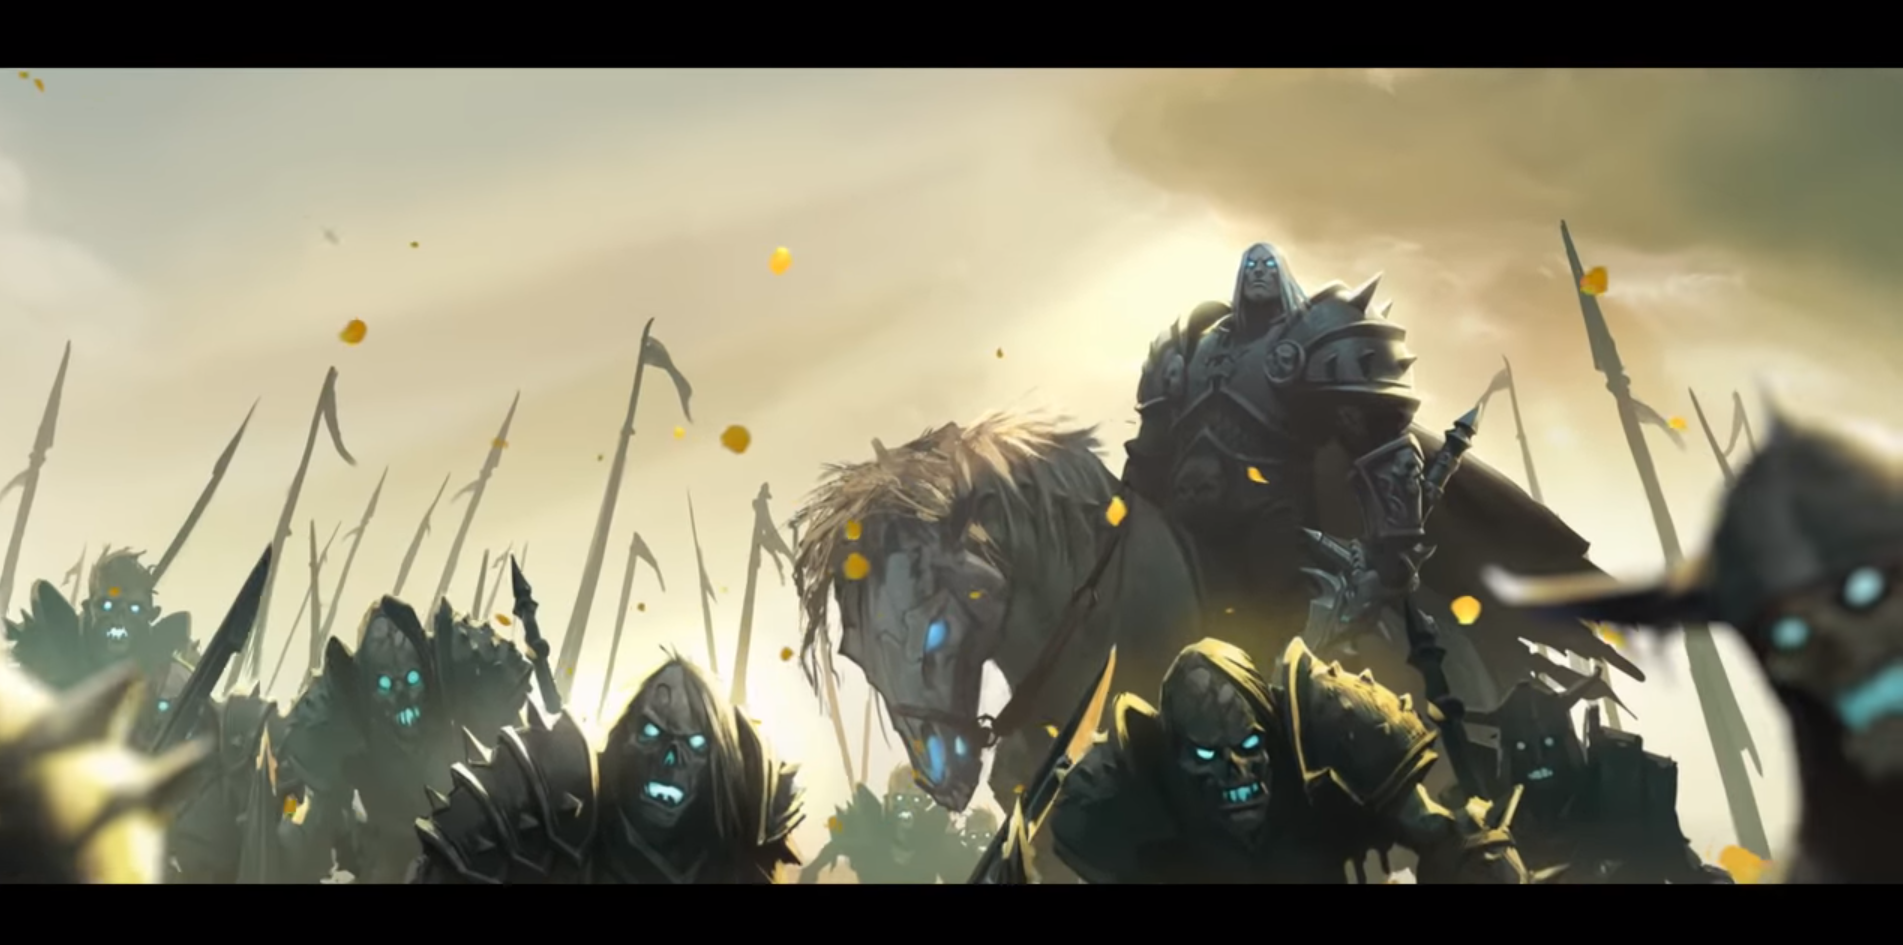 World of Warcraft - a shot of Arthas and Invincible from the Warbringers: Sylvanas animated short